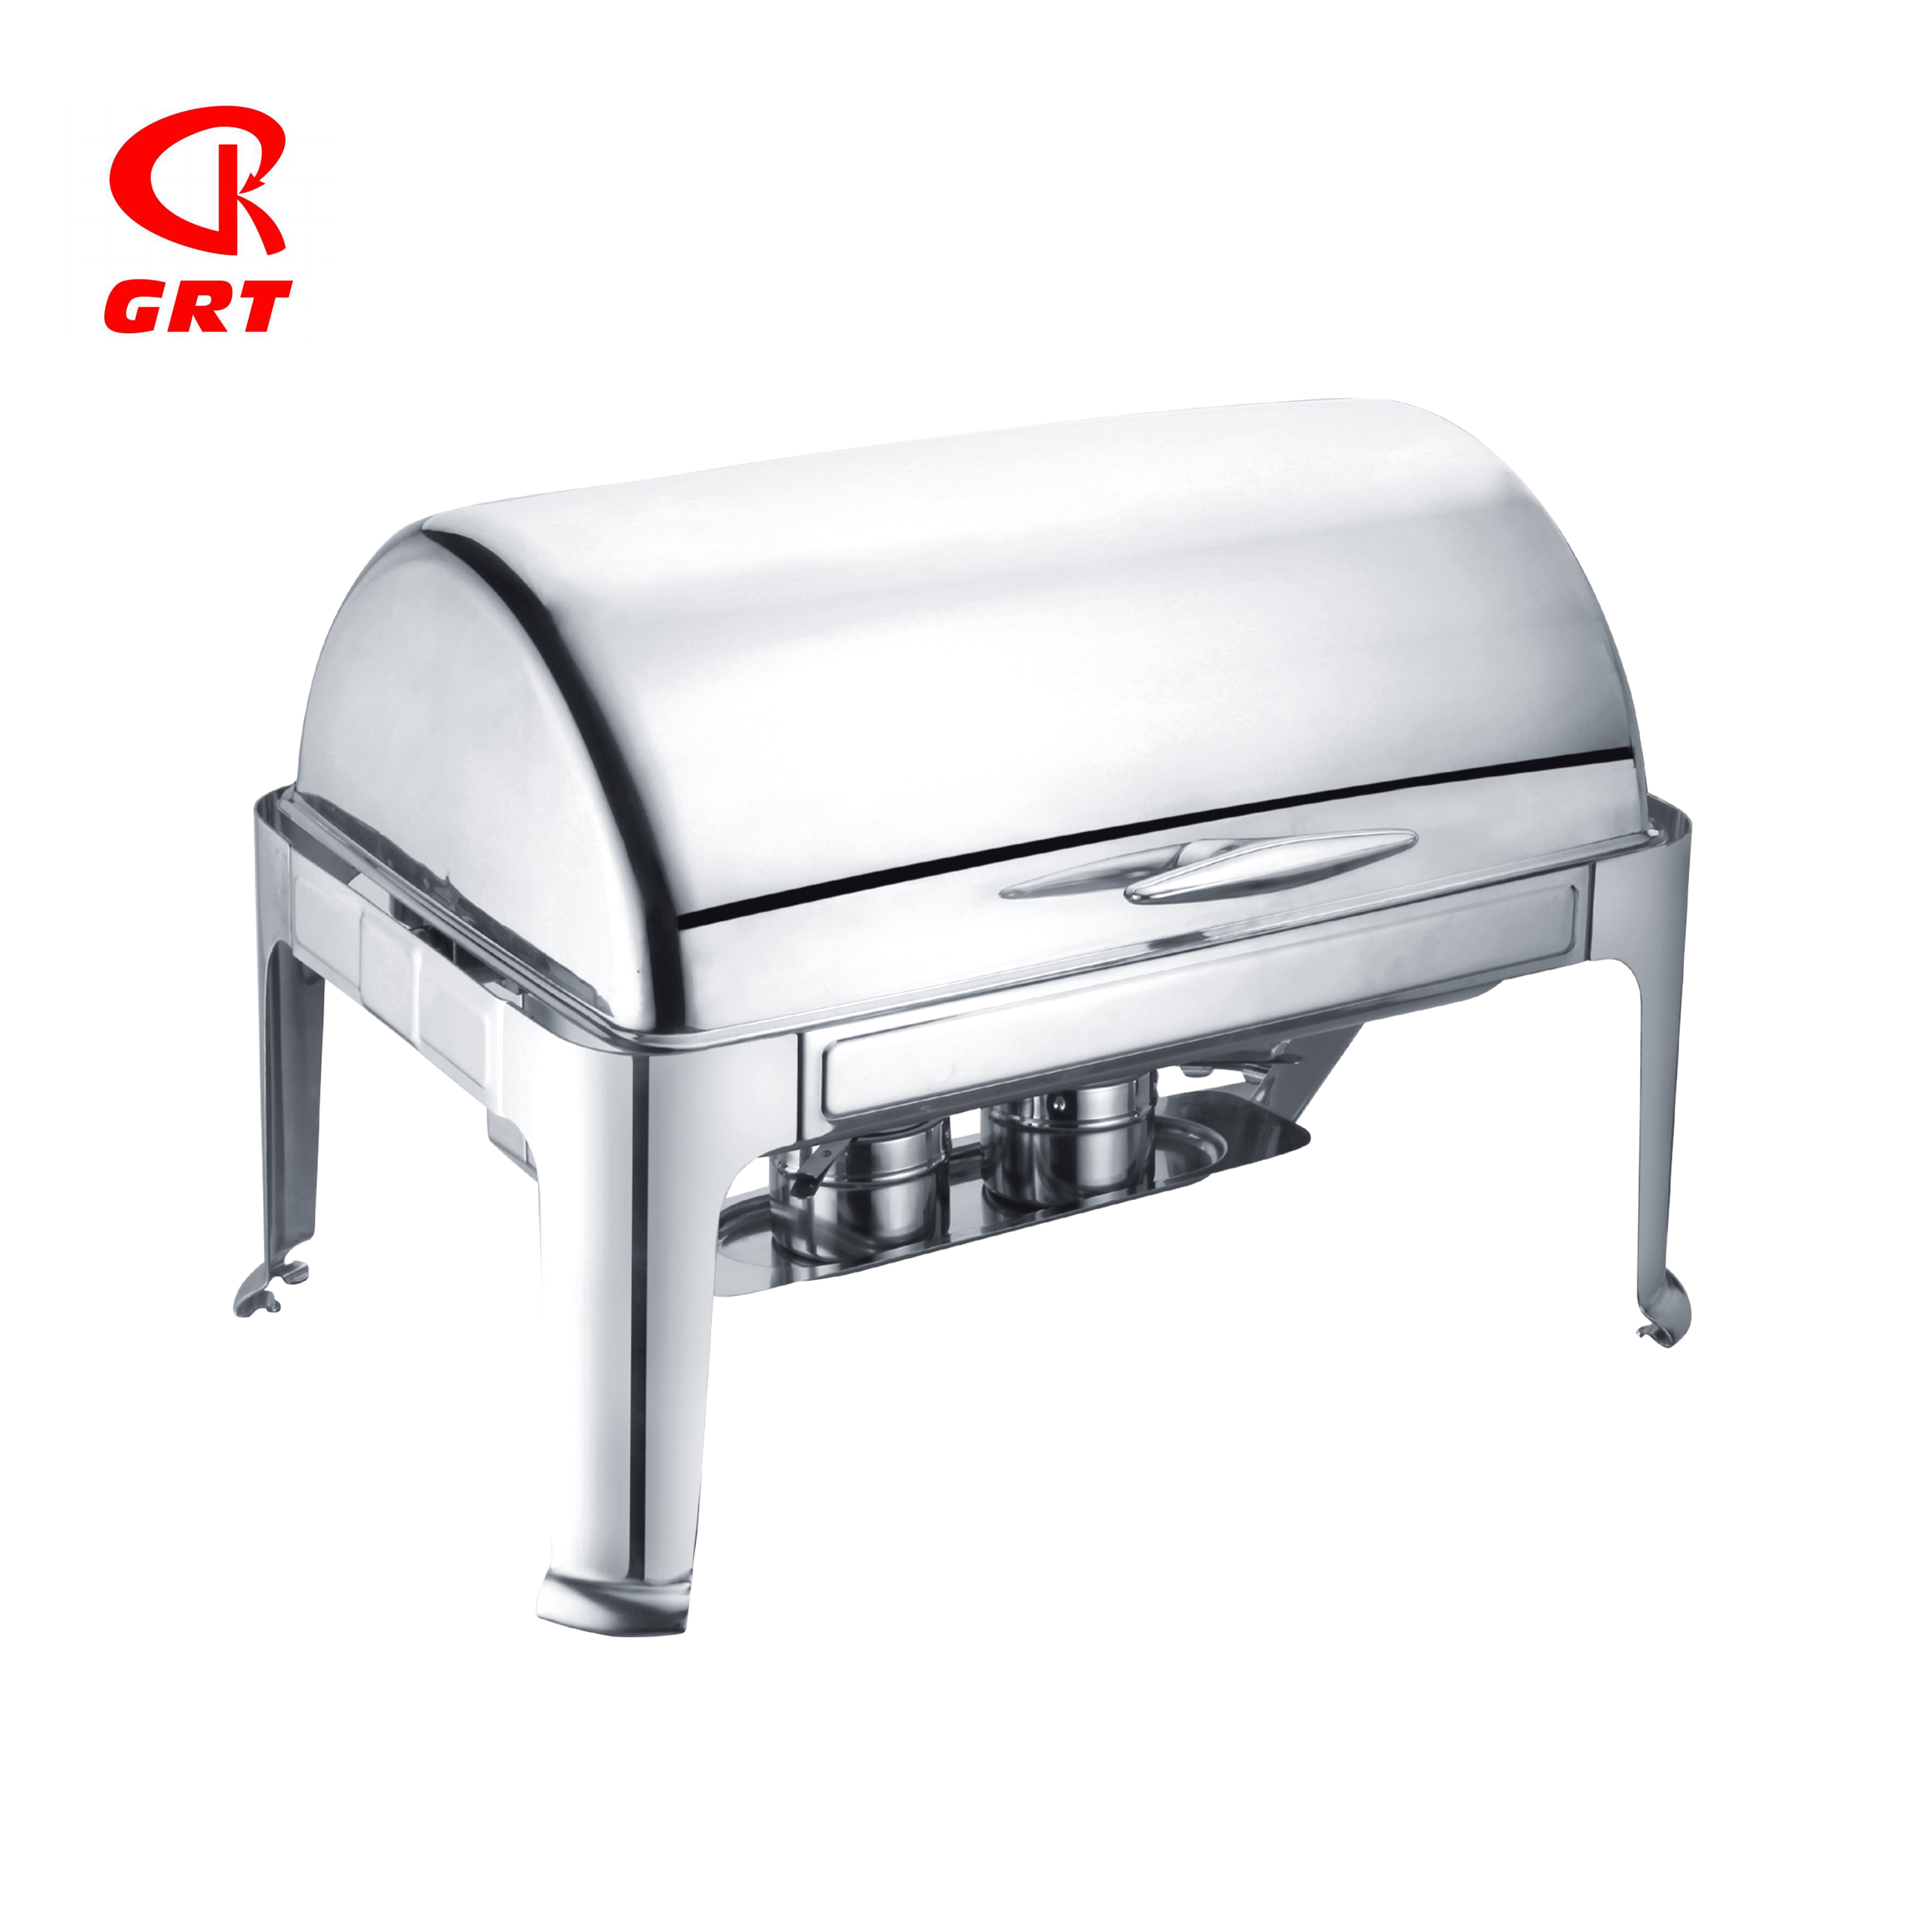 GRT-723KD 0.9mm Thick Stainless Steel Stackable Rectangular Chafing Dish 9L